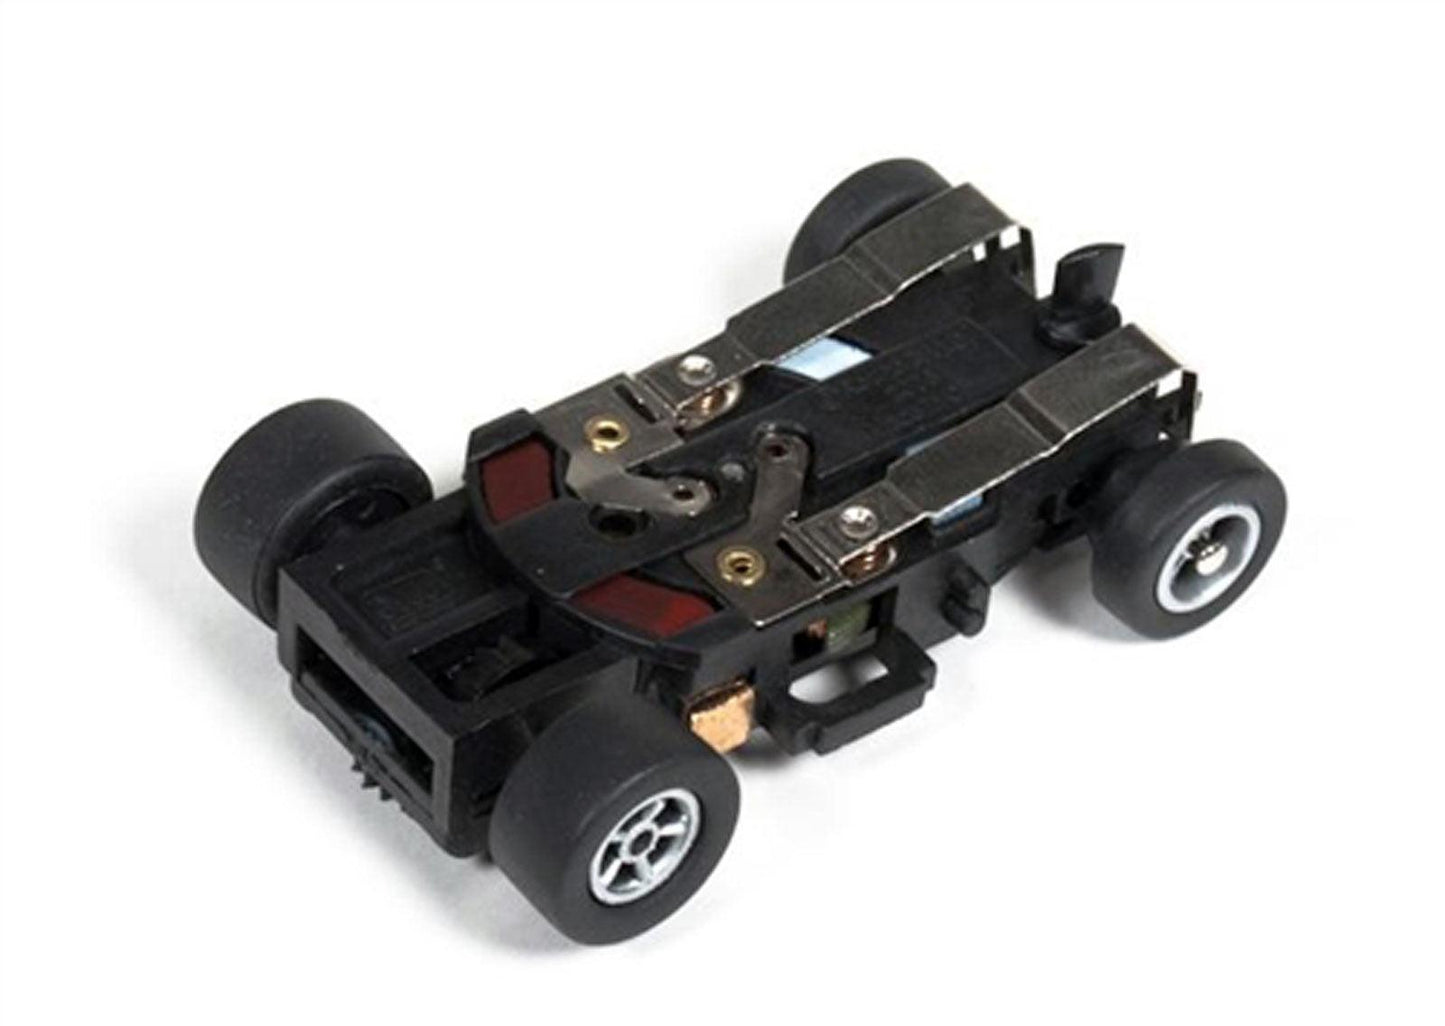 Autoworld Complete Xtraction Rolling Chassis Ho Scale Slot Car AW X-Traction - PowerHobby